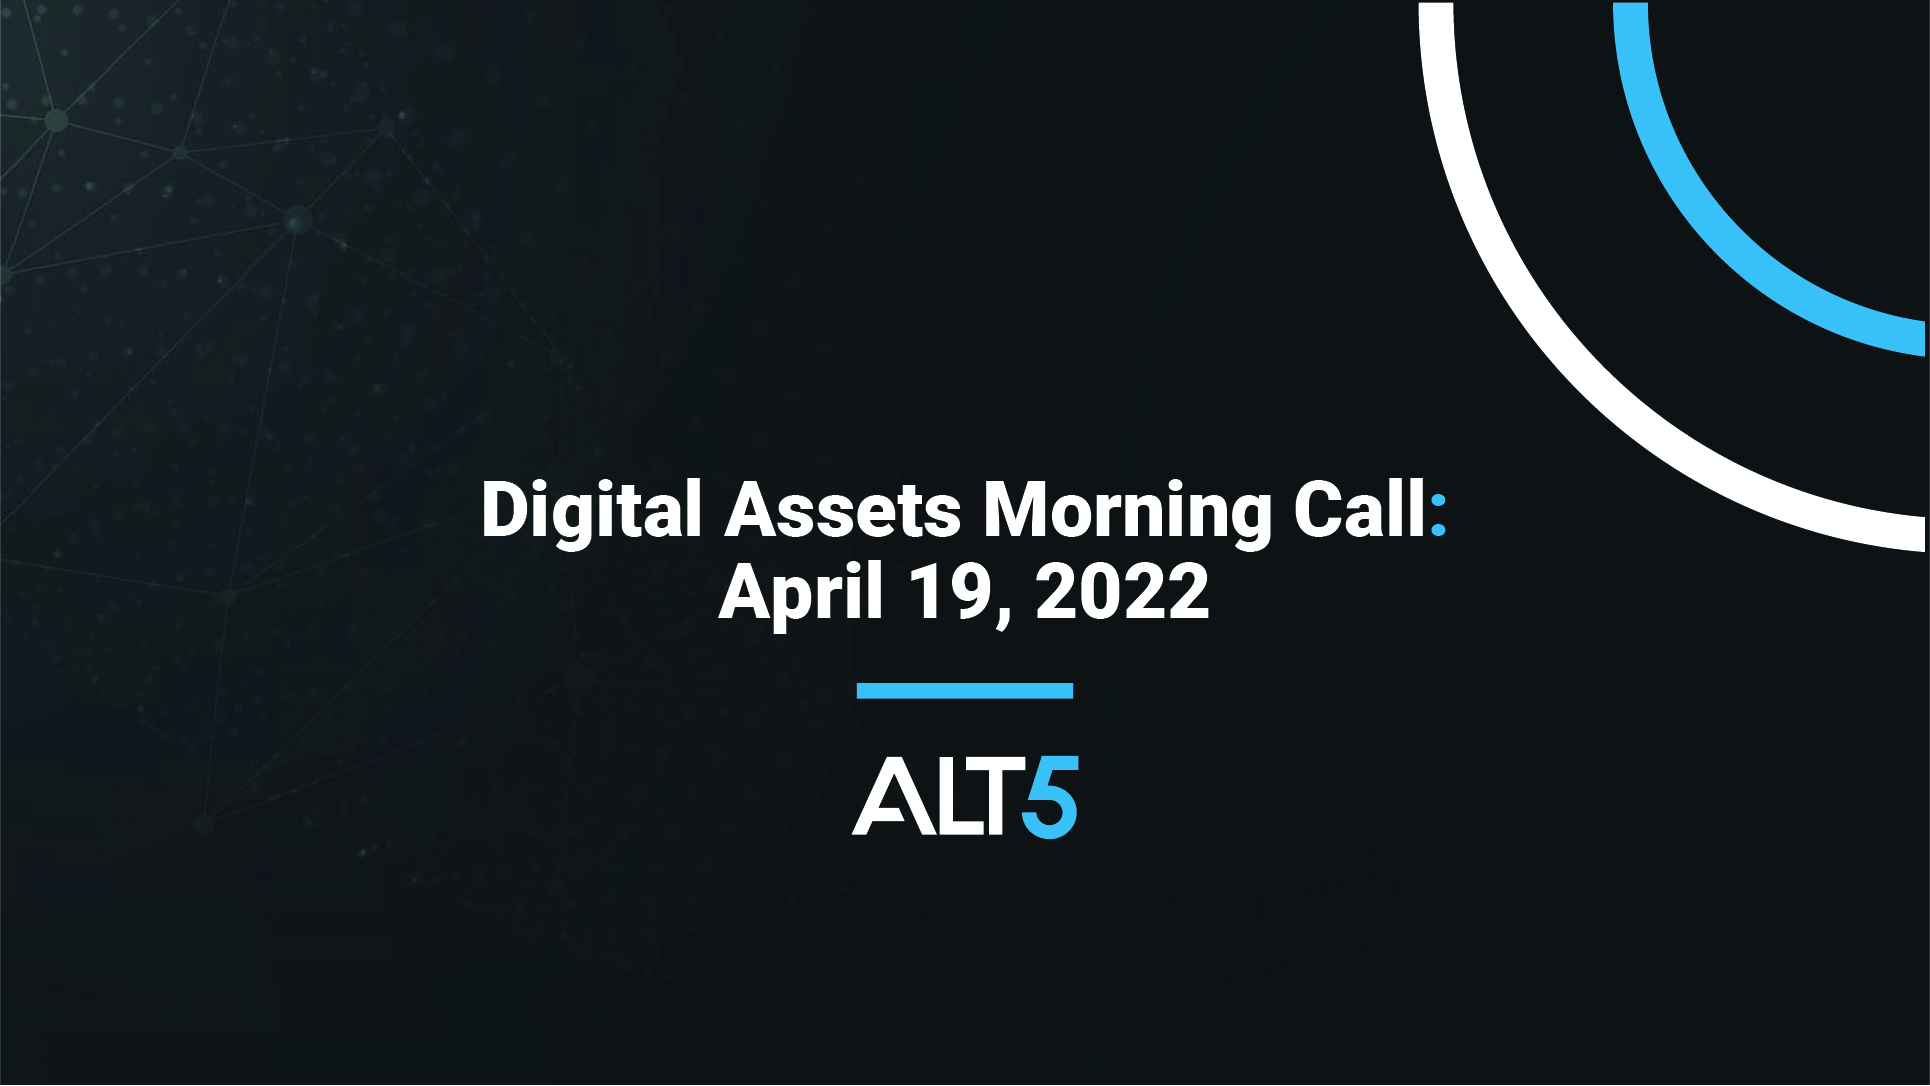 ALT 5 Digital Assets Morning Call: April 19 2022 - Crypto prices stabilize as macro backdrop evolves